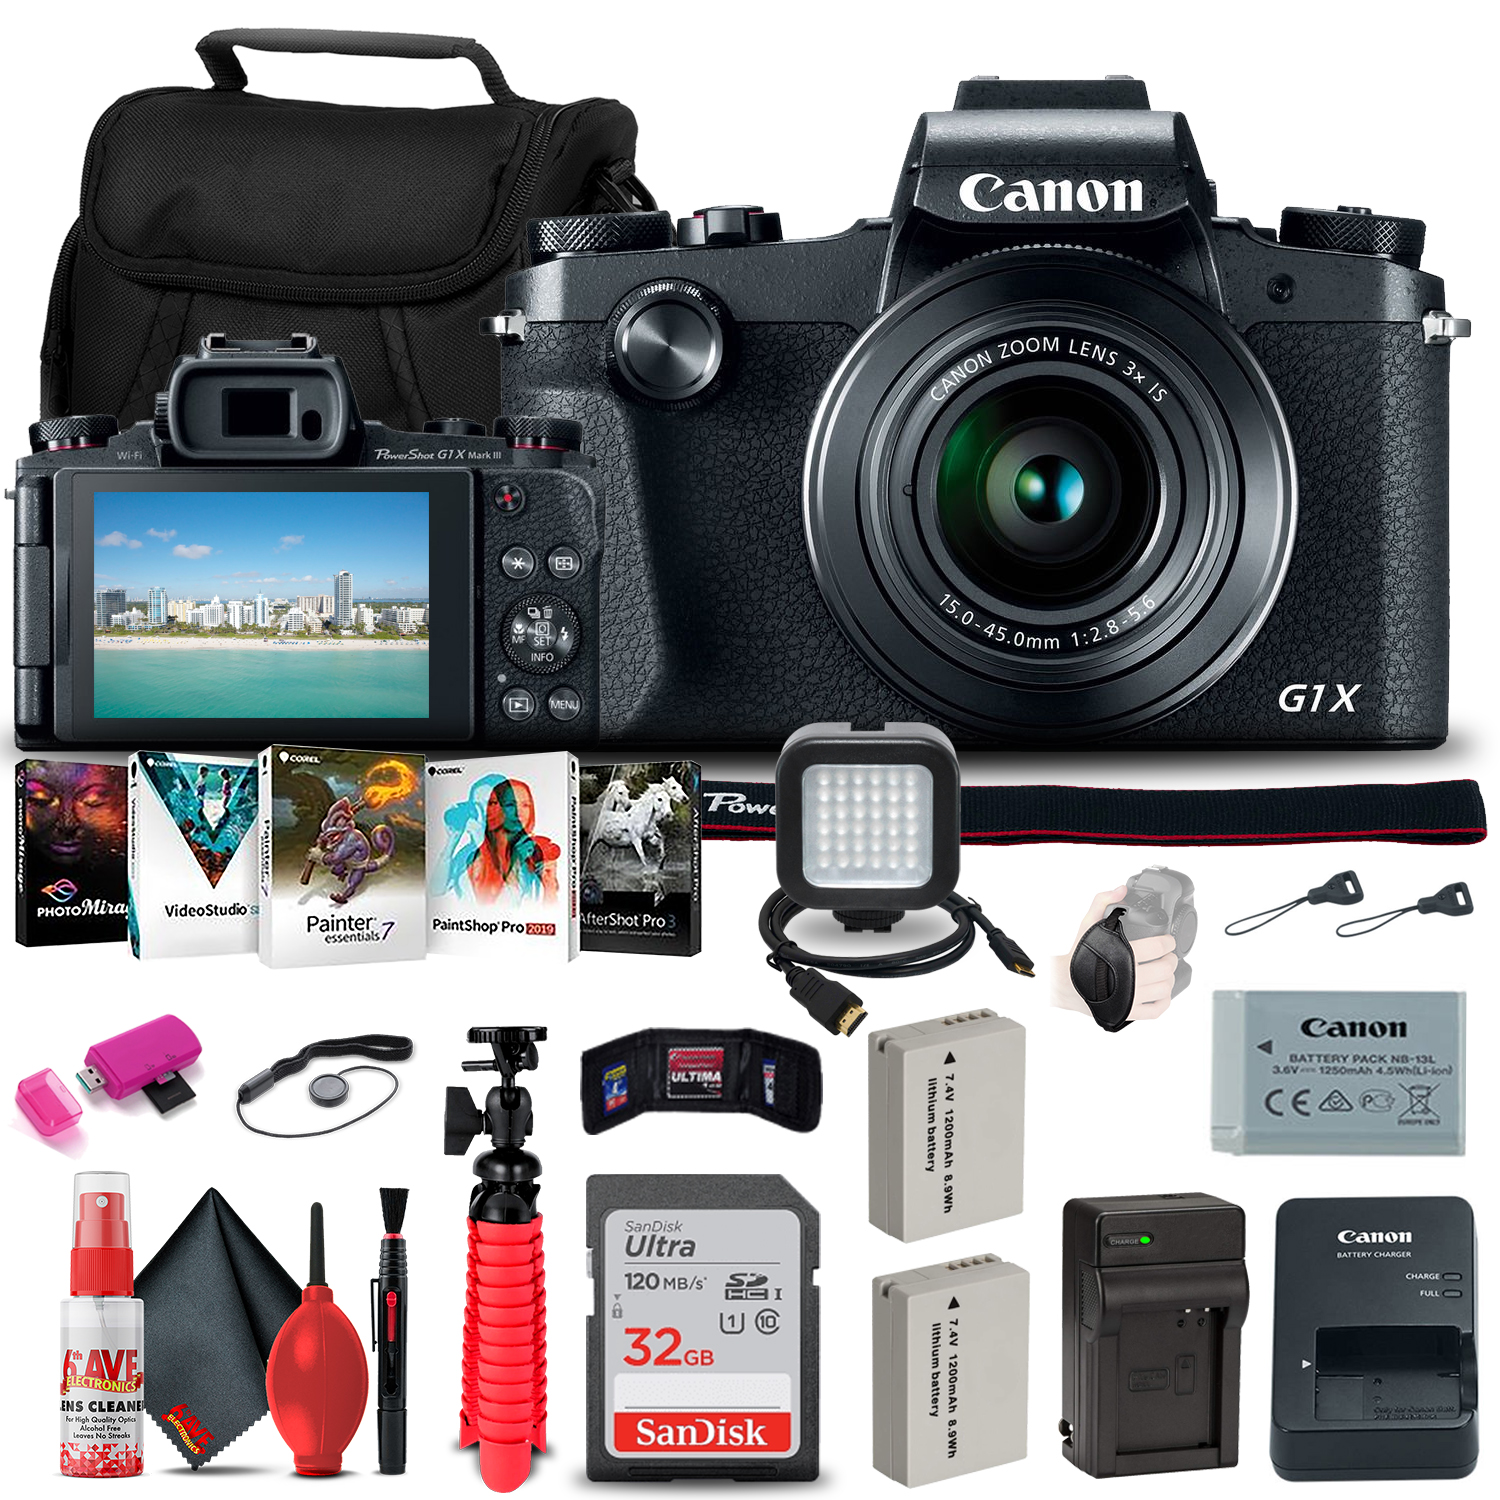 Canon PowerShot G1 X Digital Camera (5249B001) + 32GB Card + 2 x NB10L Battery + NB10L Charger + Card Reader + LED Light + Corel Photo Software + Case + Flex Tripod + HDMI Cable + Hand Strap + More - image 1 of 7